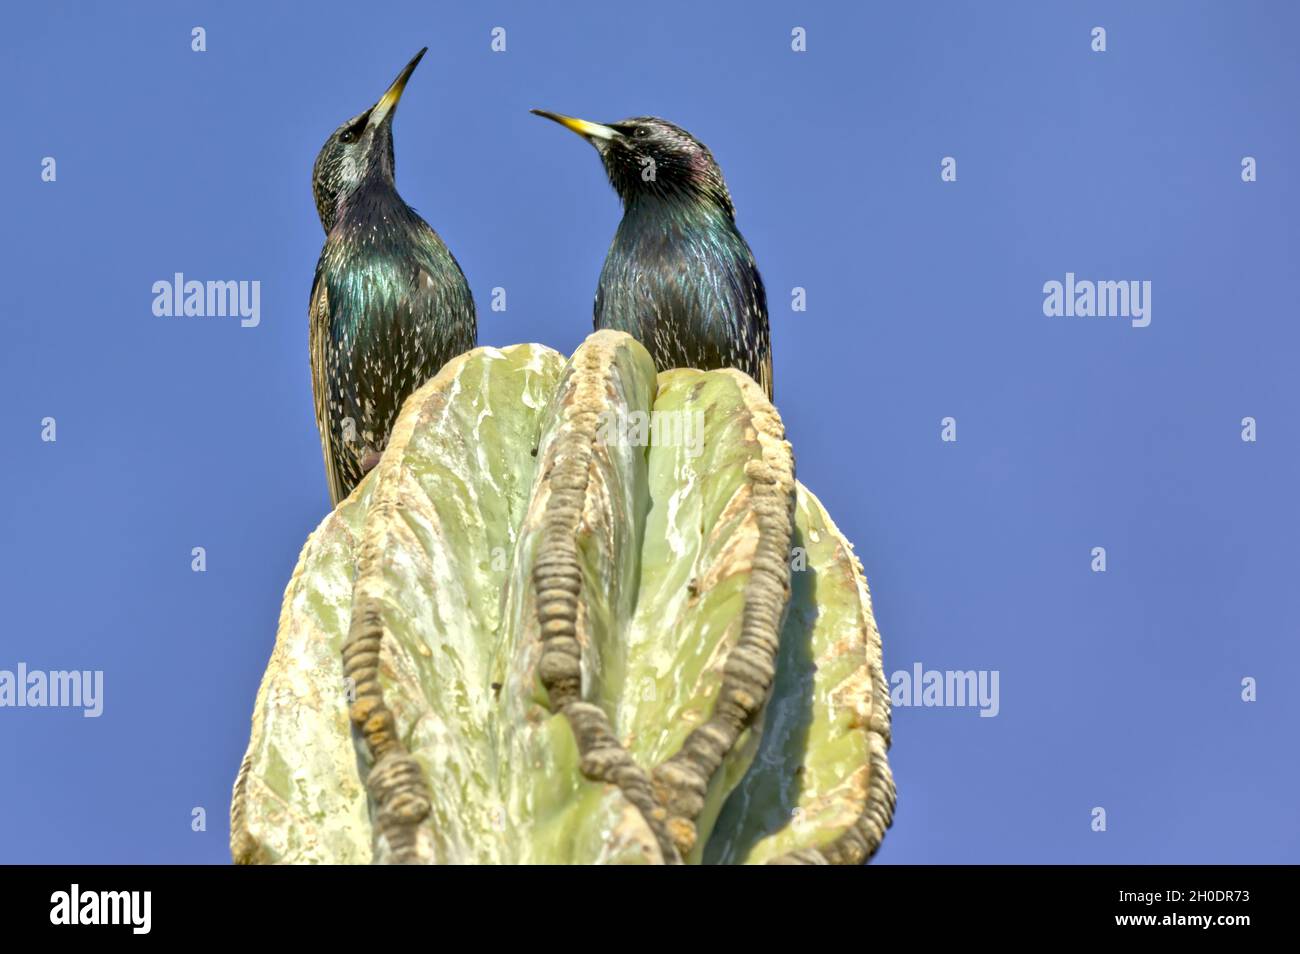 A pair of Starlings on top of a cactus in Arizona looking skyward in response to an aircraft flying overhead. Please note that Starlings are not nativ Stock Photo